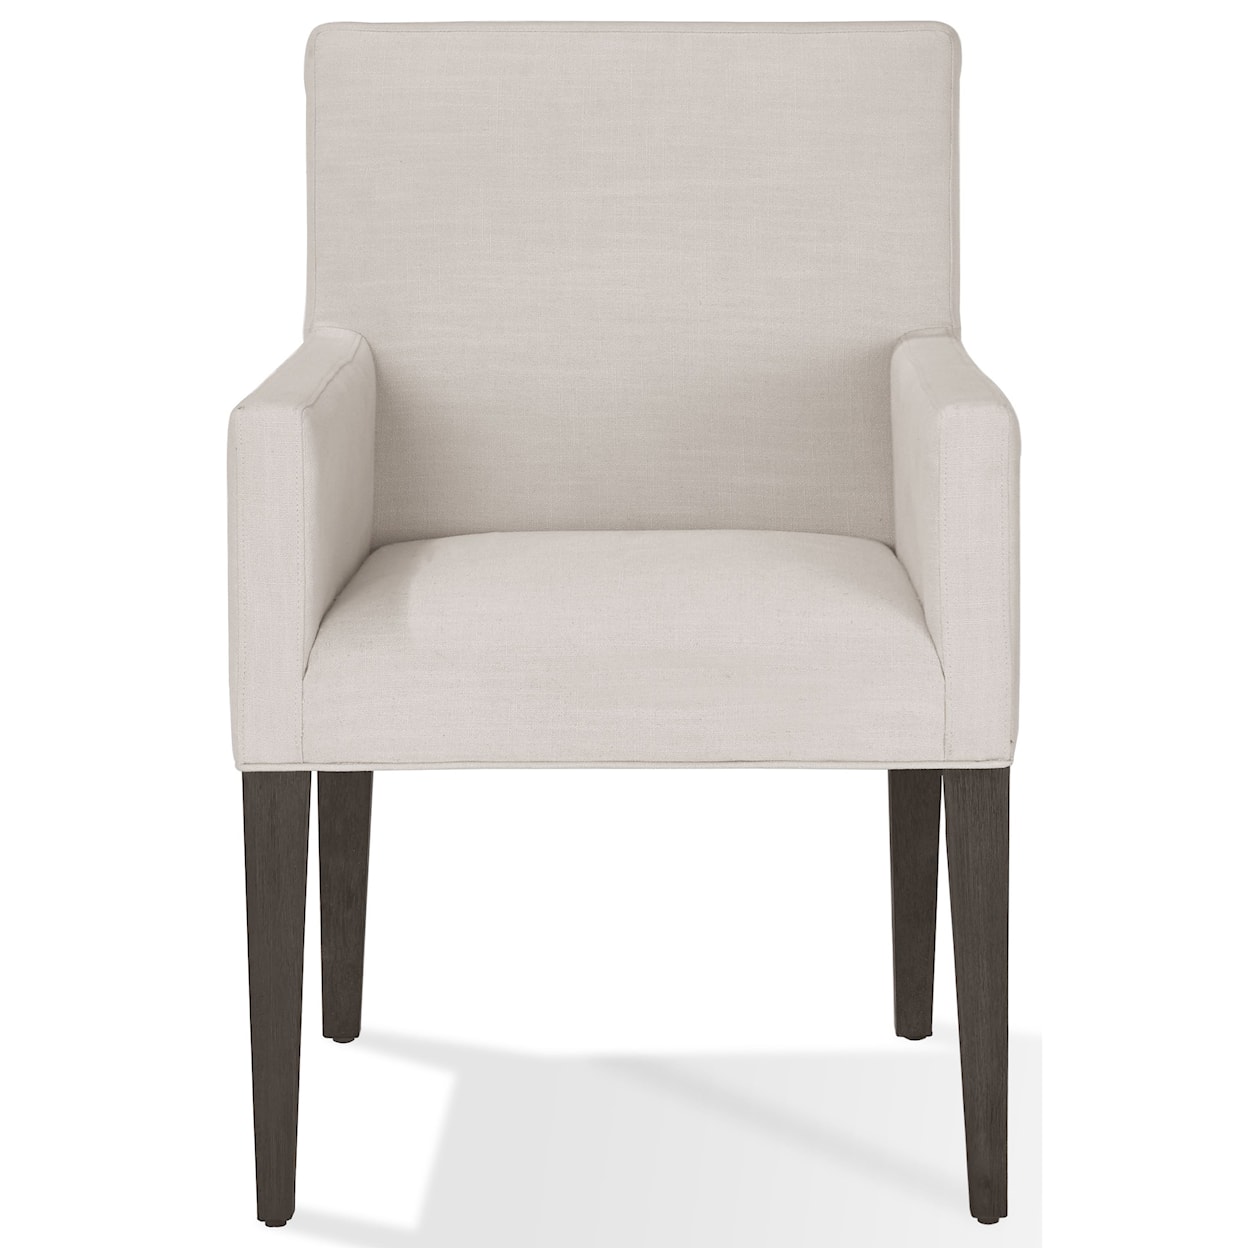 Modus International Modesto Upholstered Arm Chair in French Roast